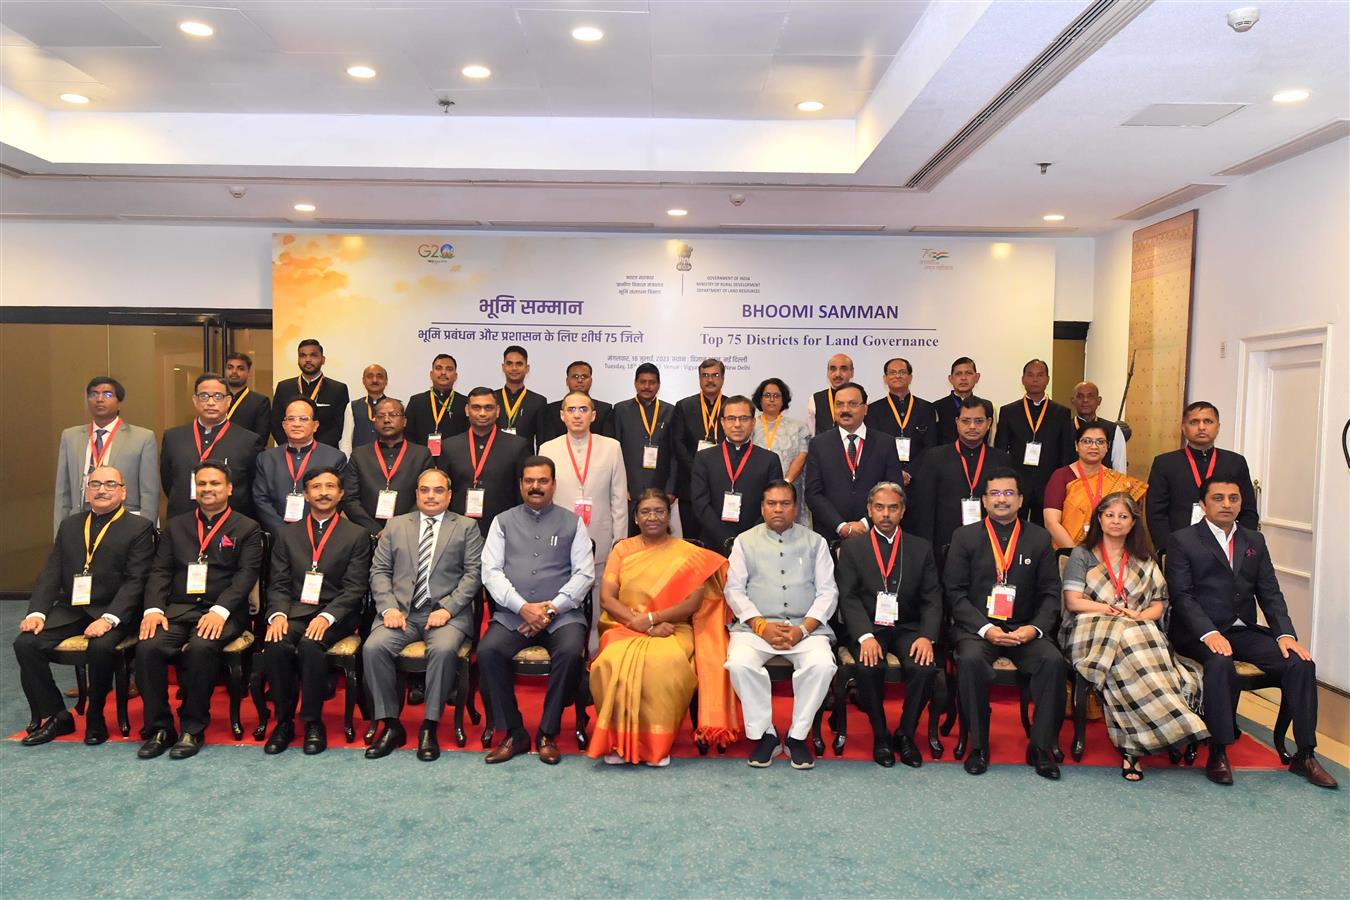 The President of India, Smt Droupadi Murmu presented the "Bhoomi Samman" 2023 at a function organised by the Union Ministry of Rural Development in New Delhi on July 18, 2023.